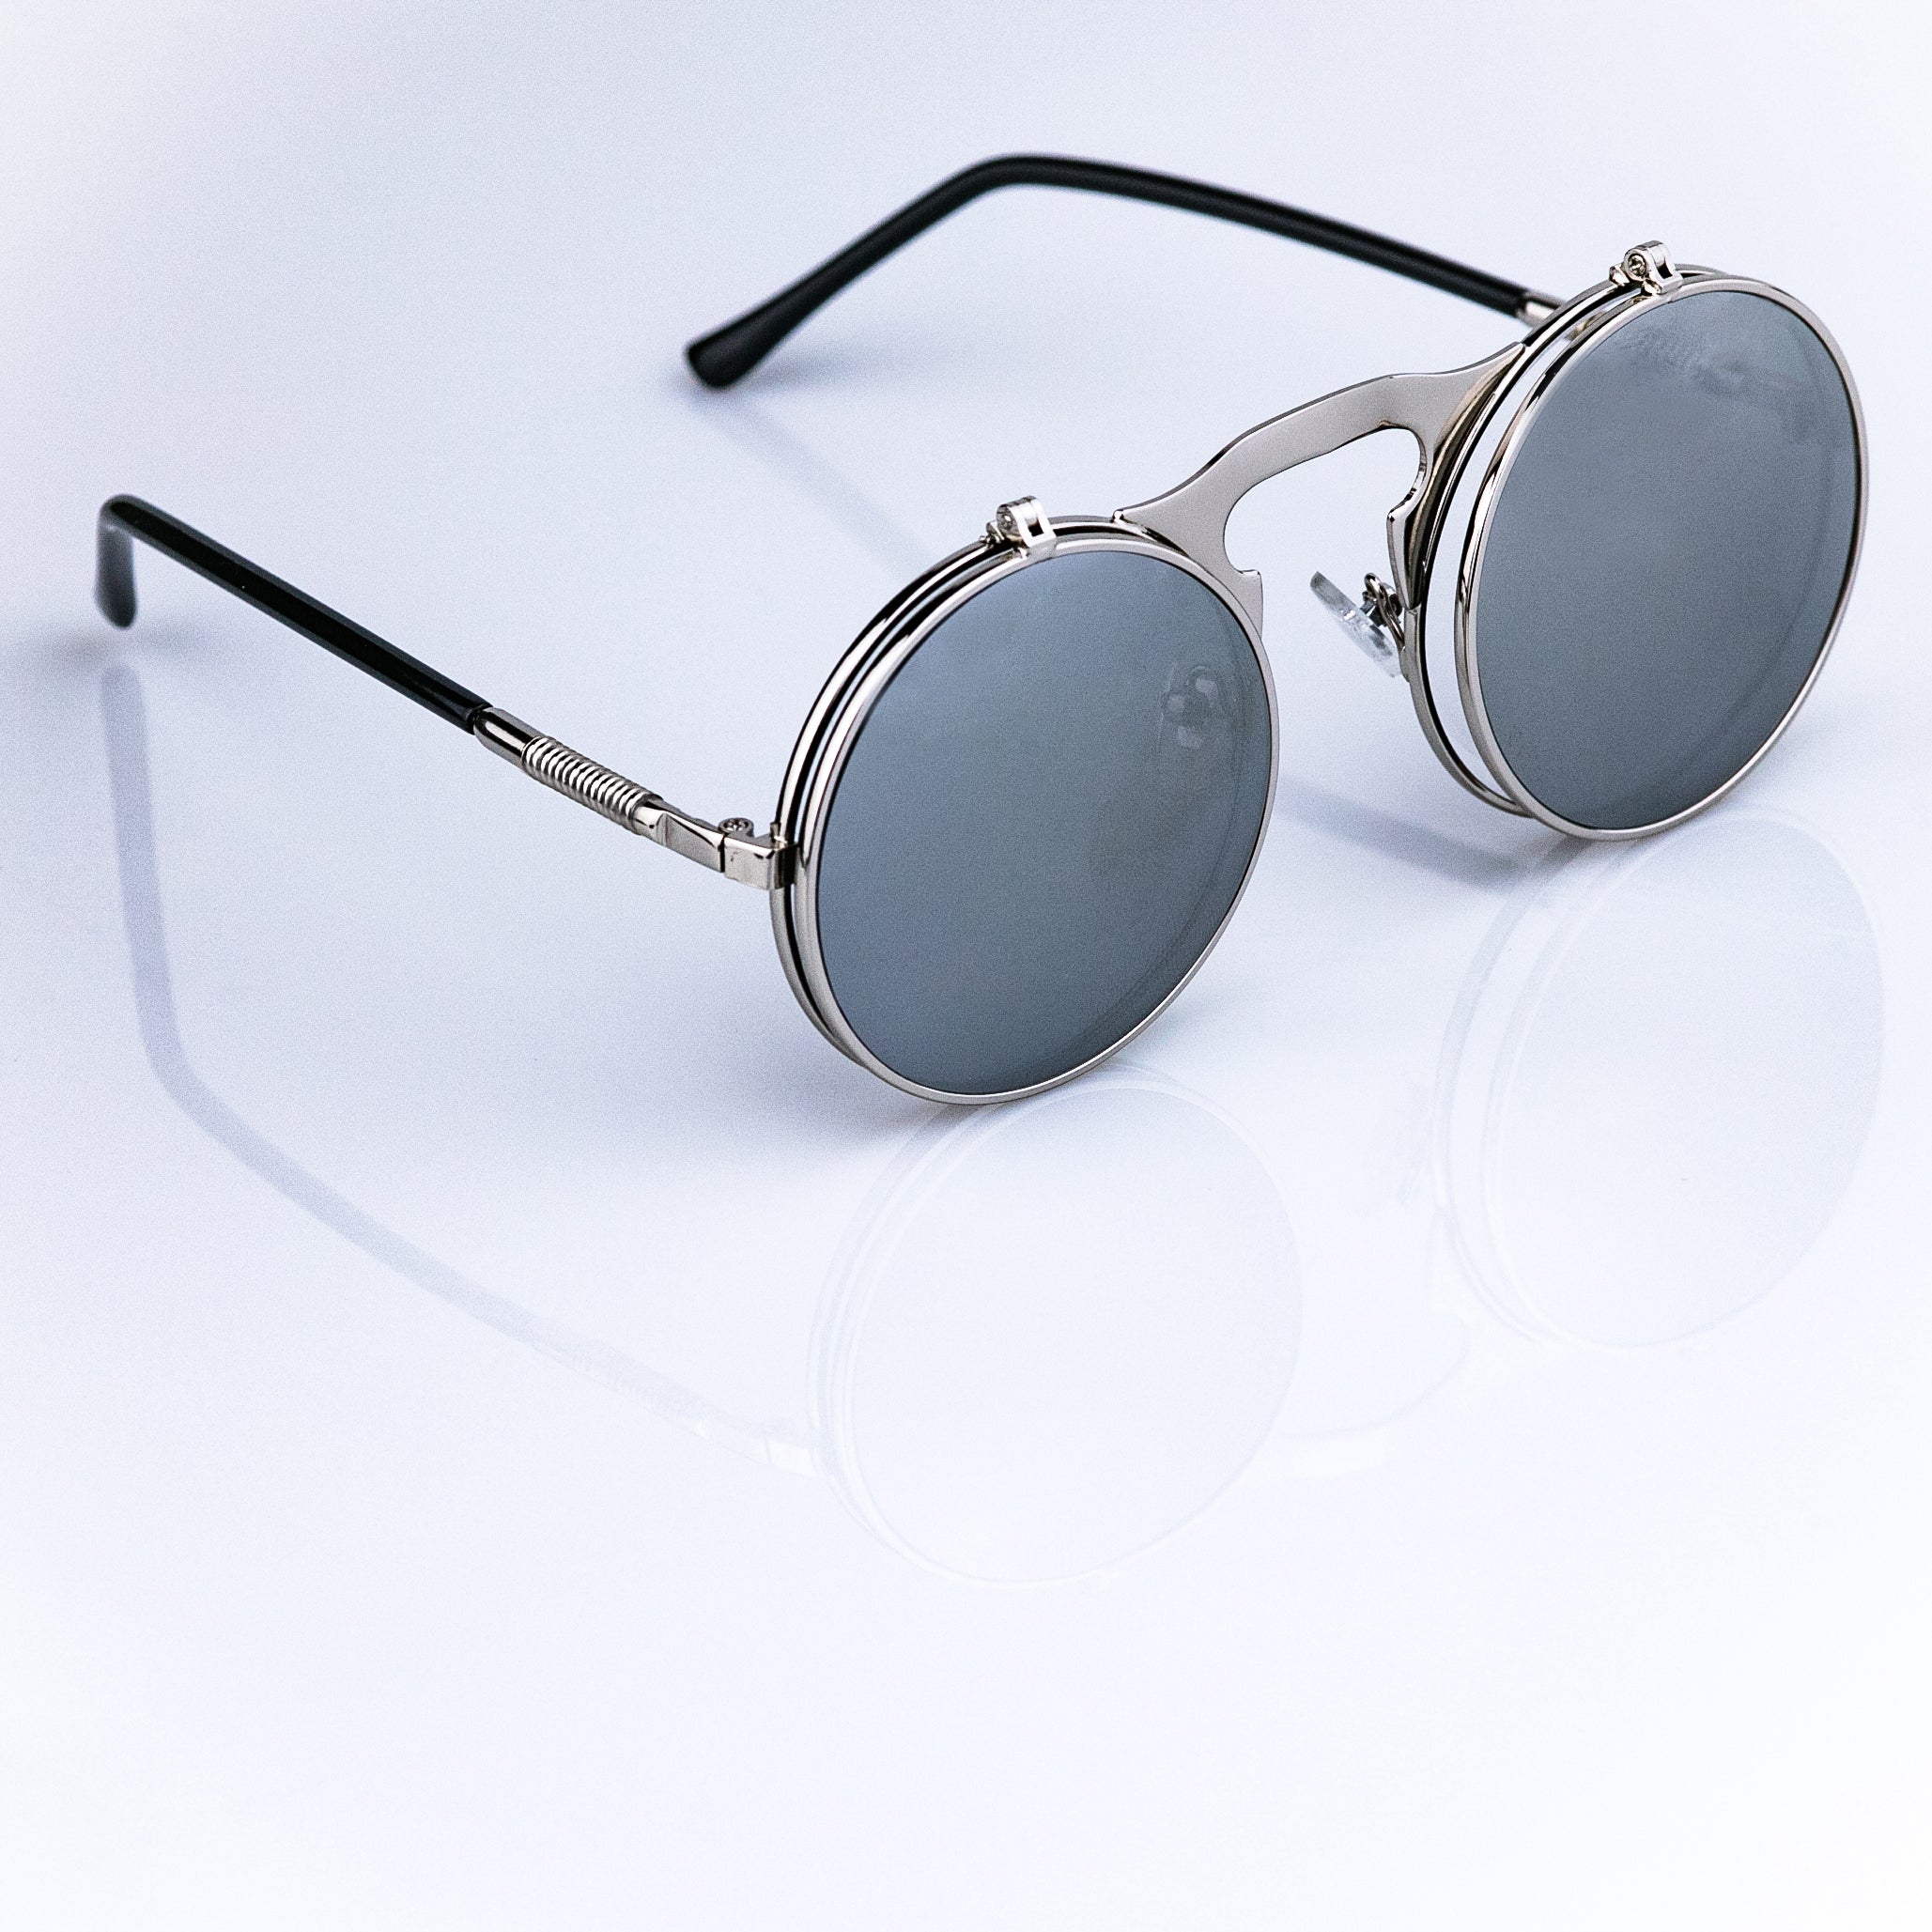 Hipster Sunglasses Steampunk Gothica Silver Frame